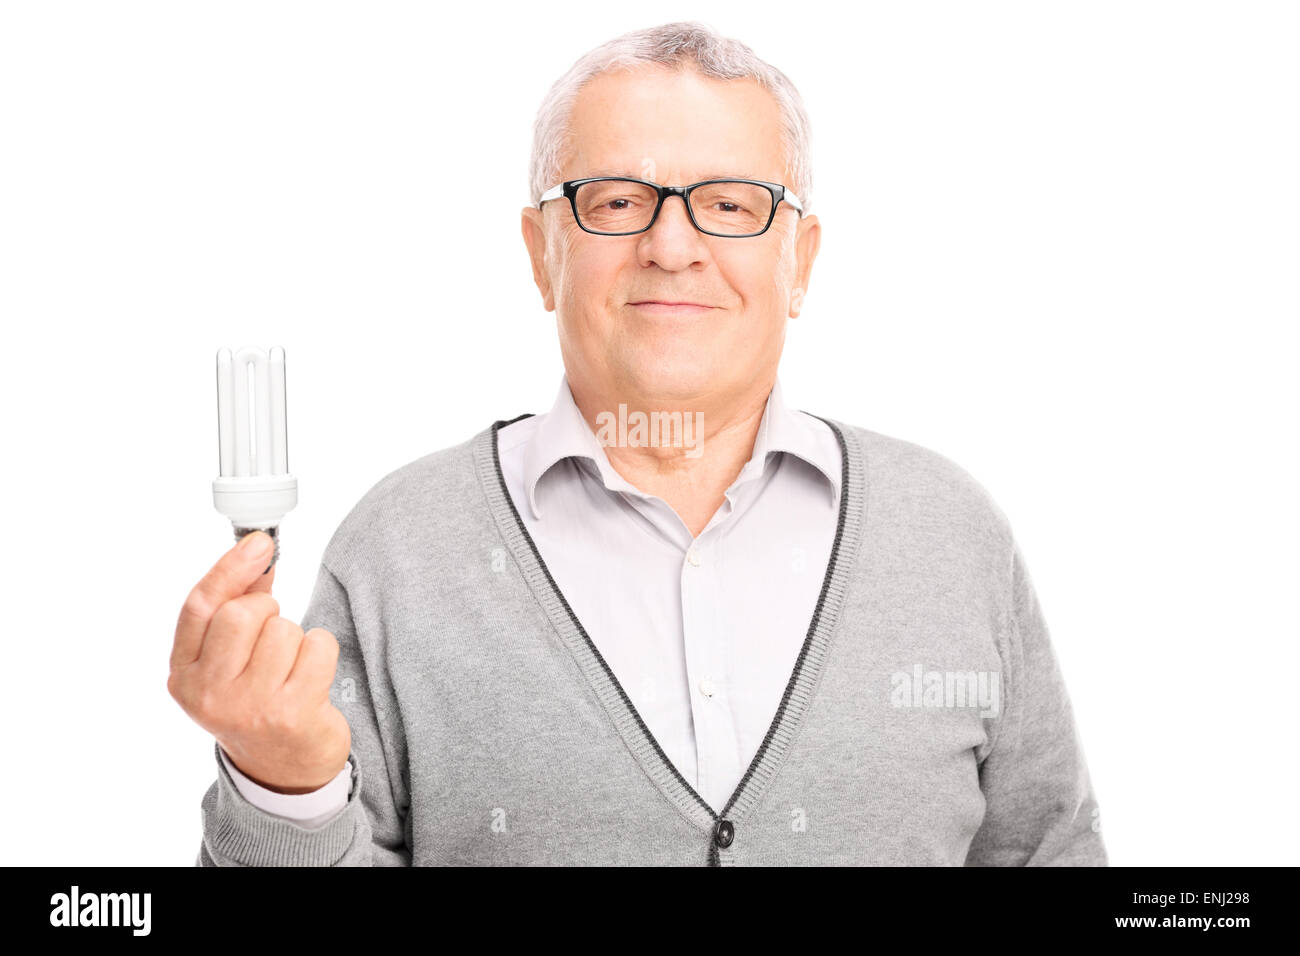 Close-up on a senior gentleman holding an energy efficient light bulb and looking at the camera isolated on white background Stock Photo